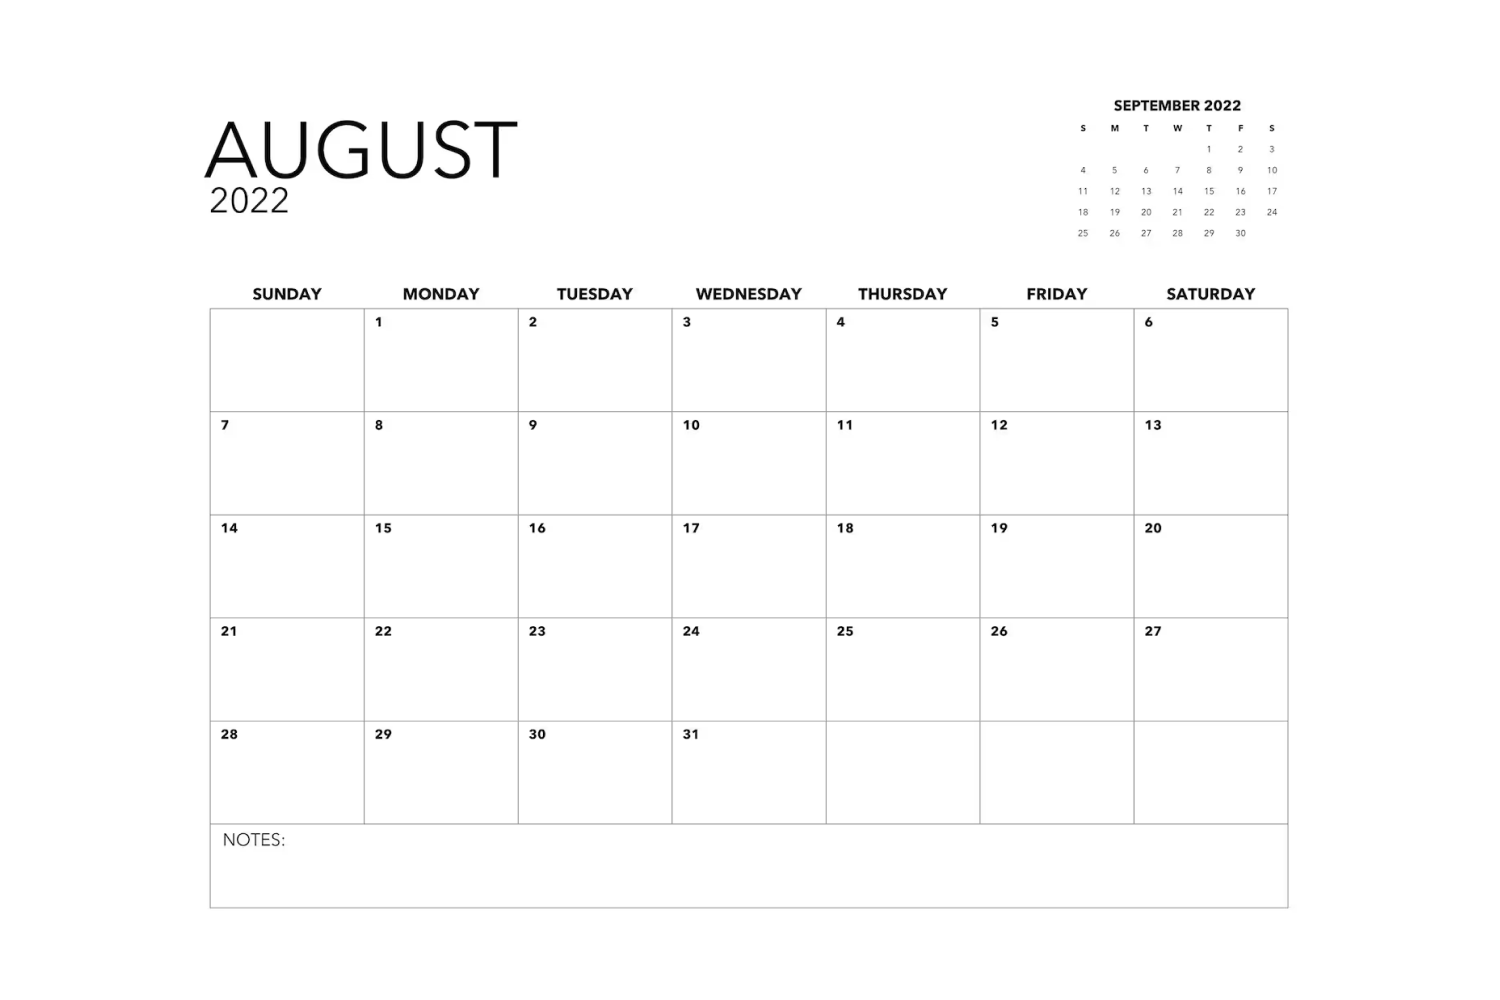 Calendar in the form of a table in black and white design.